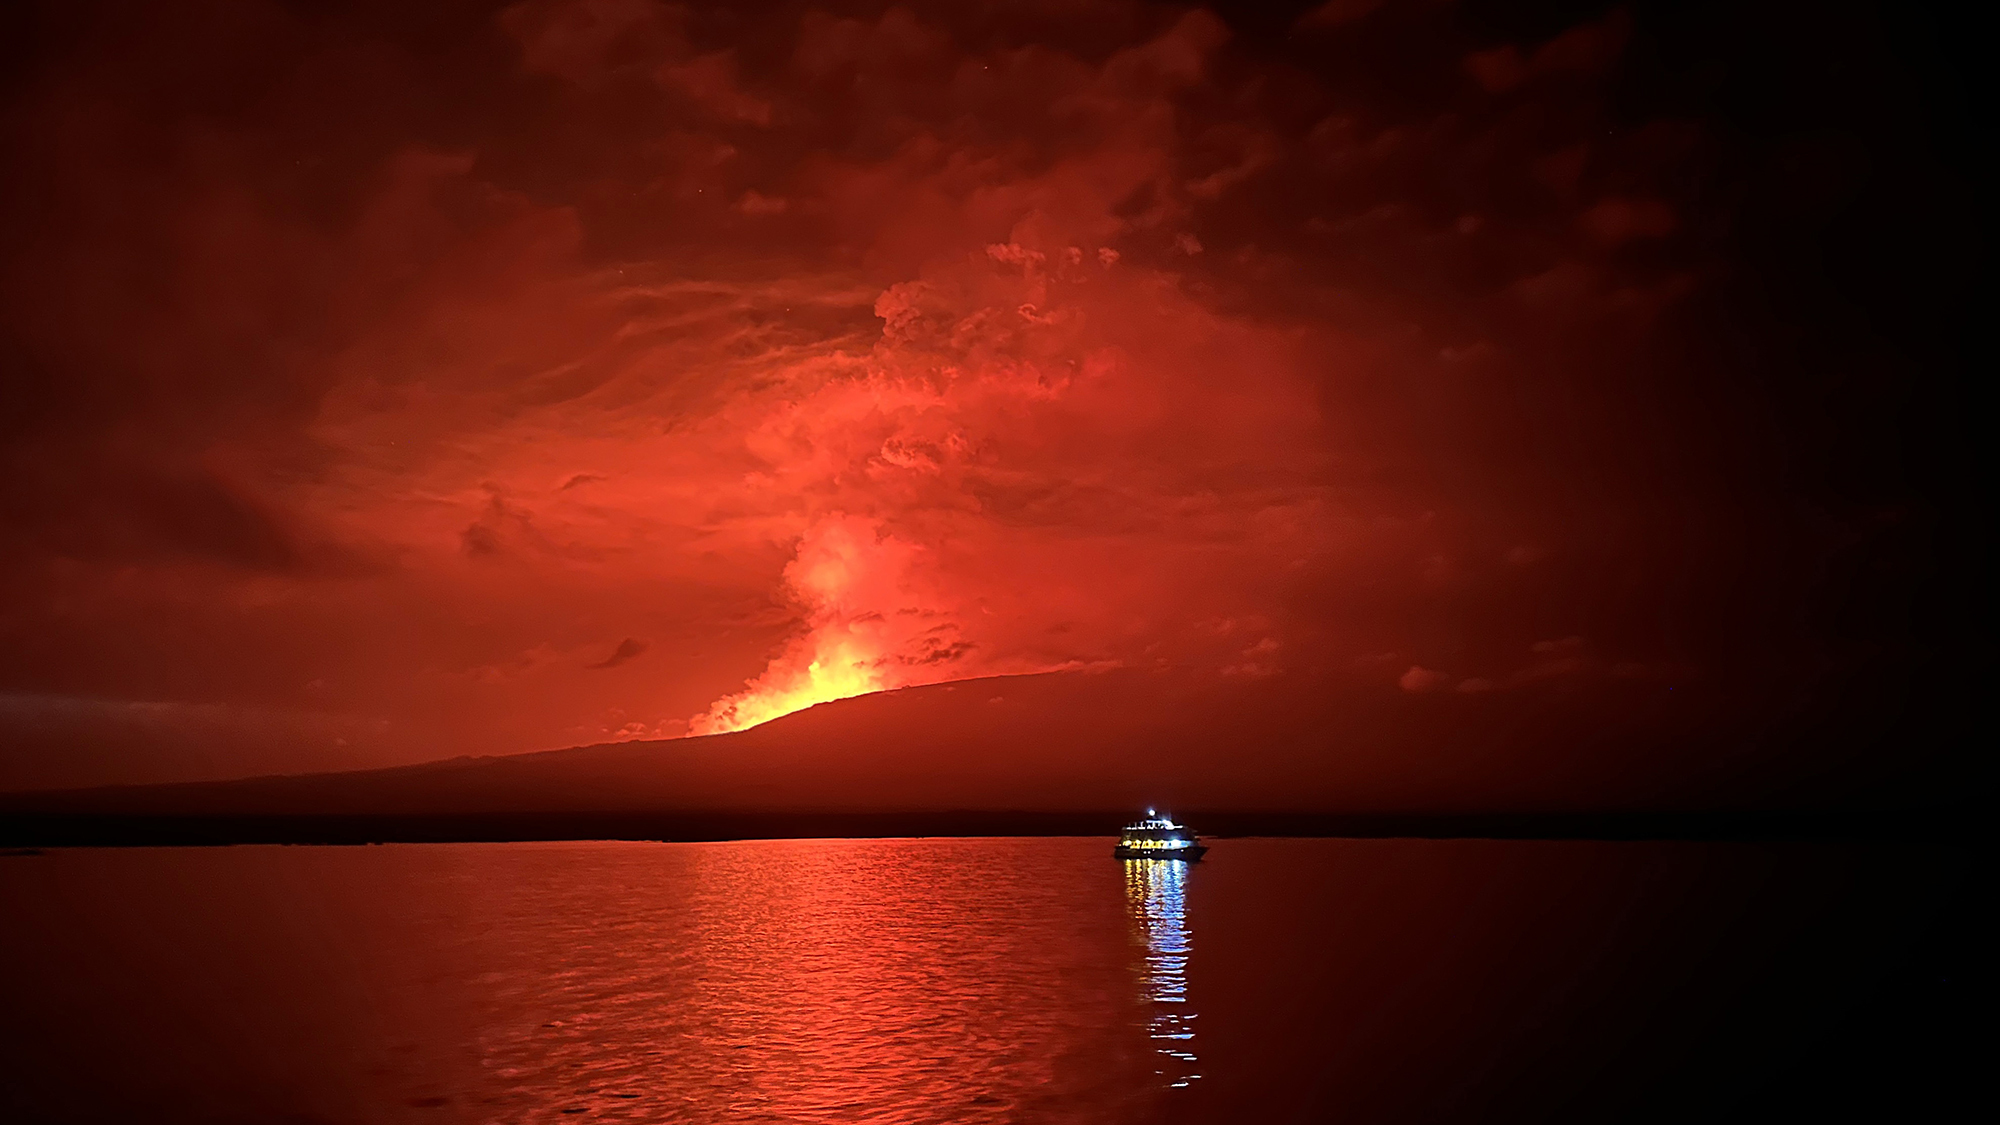 Volcano on island in the Galapagos spews lava into the sea